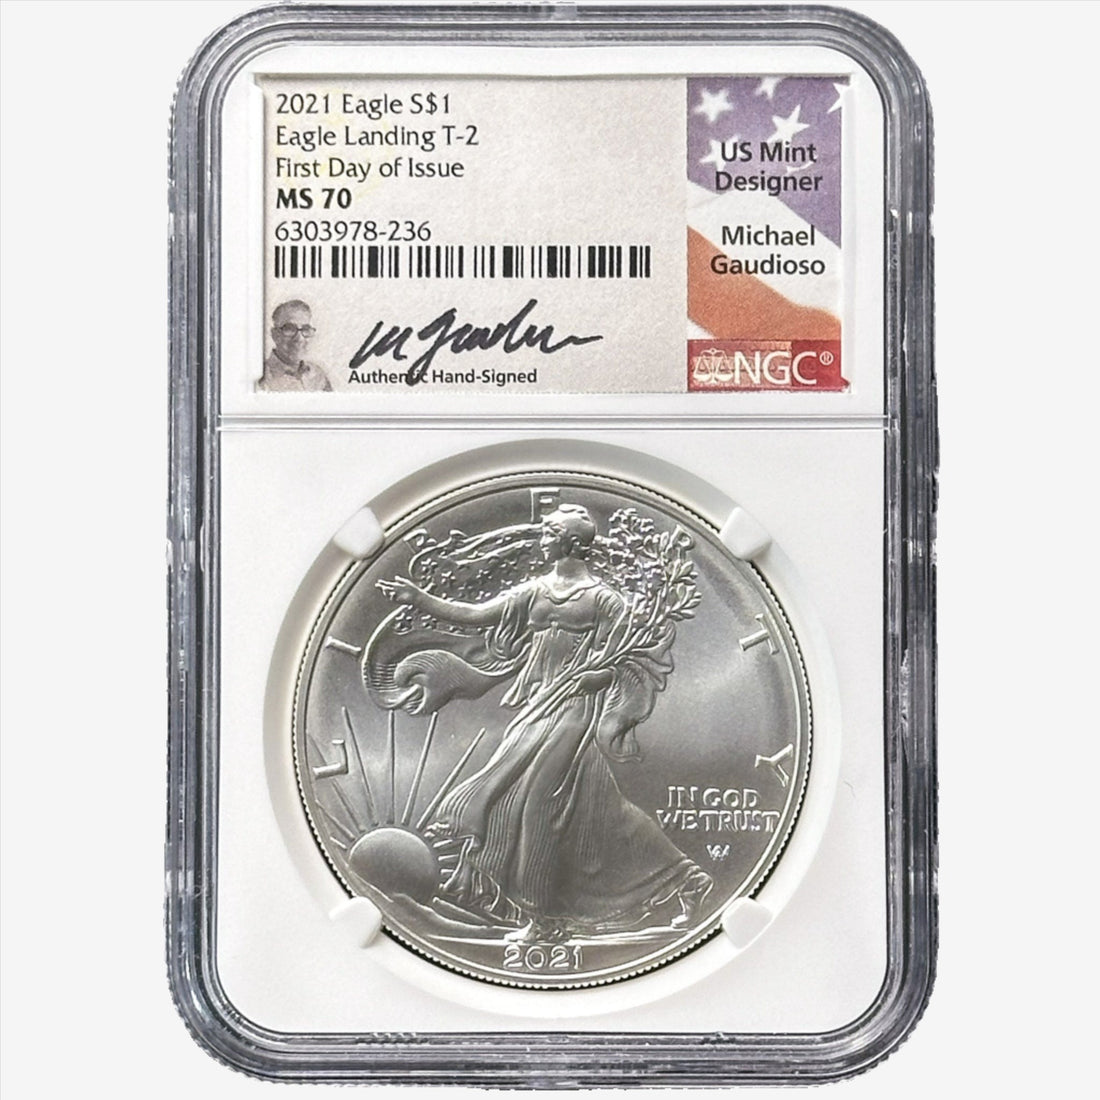 2021 1 oz Silver Eagle Landing T-2 First Day Issue MS 70 - OZB